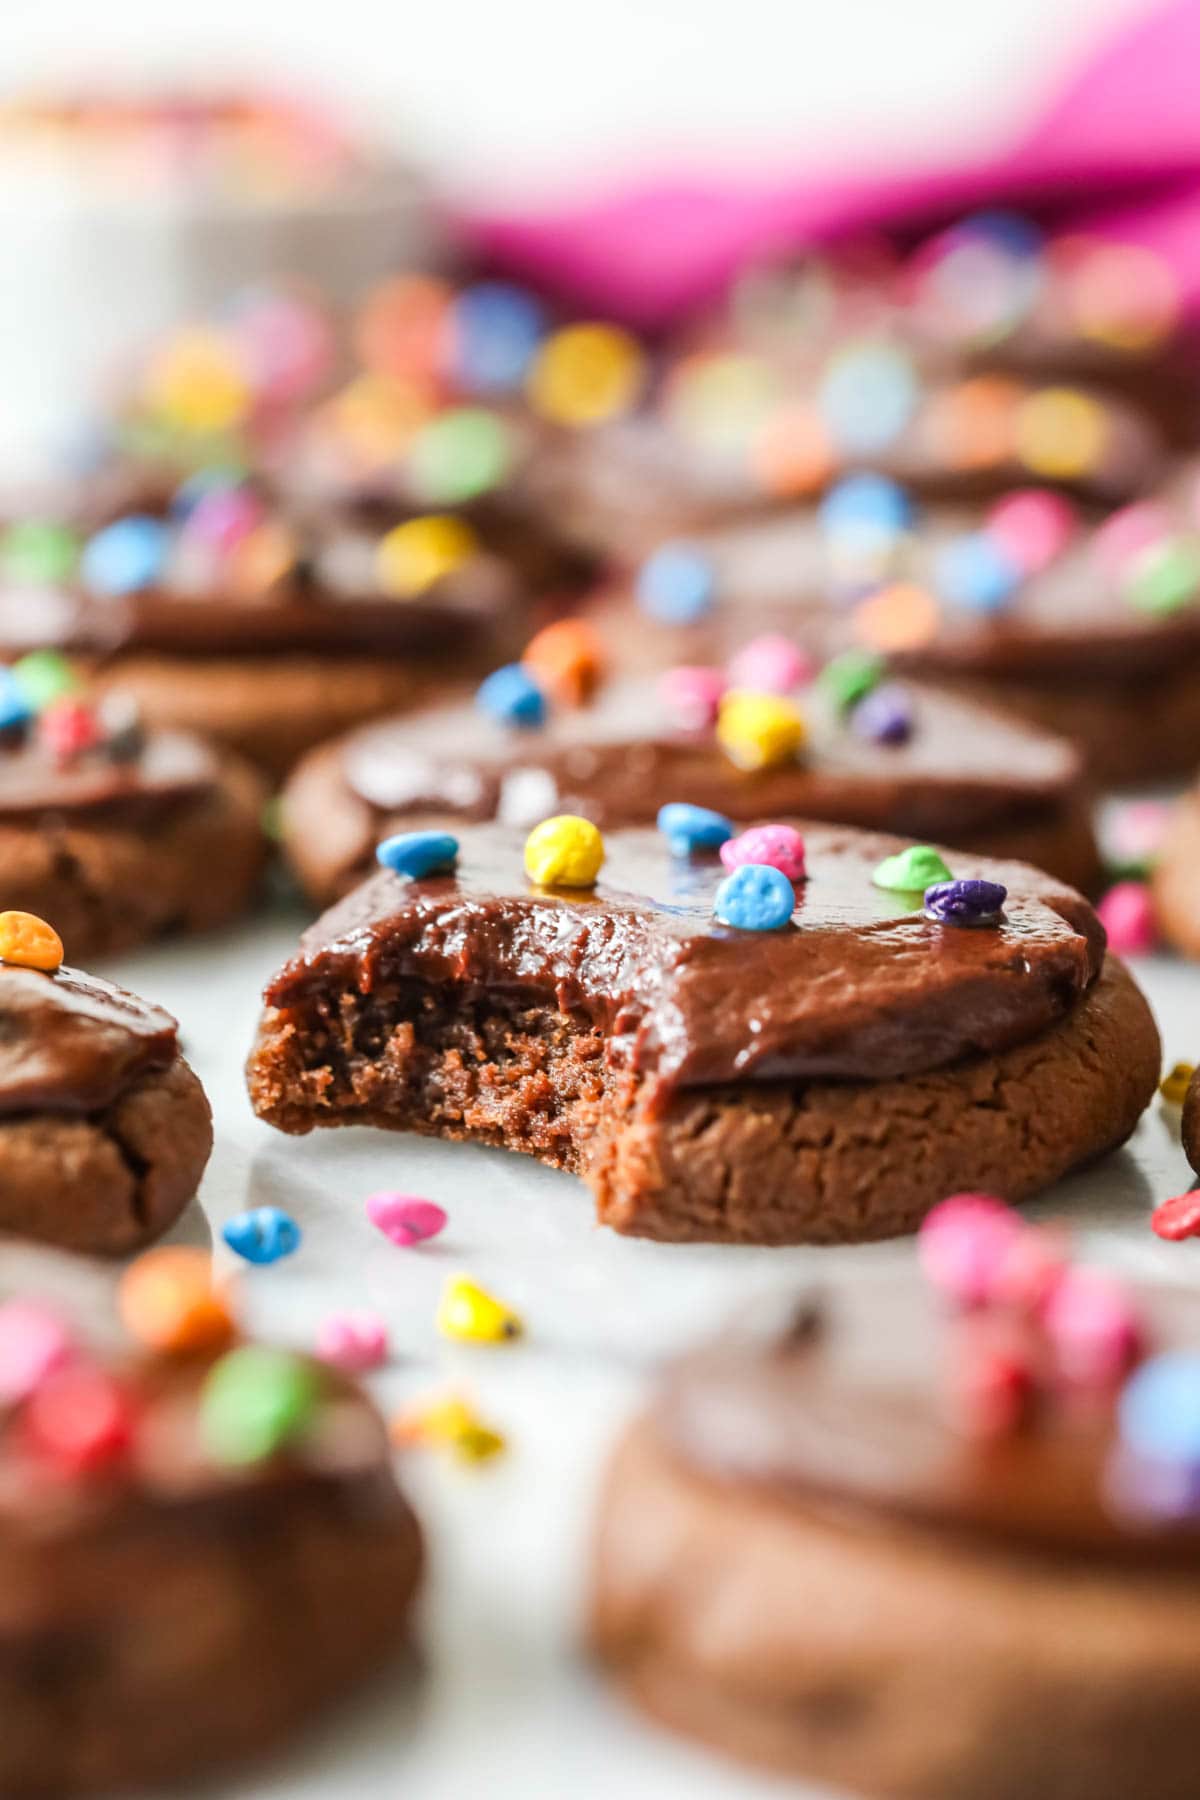 Chocolate cookies topped with fudge frosting and colored candy chips to look like cosmic brownies.